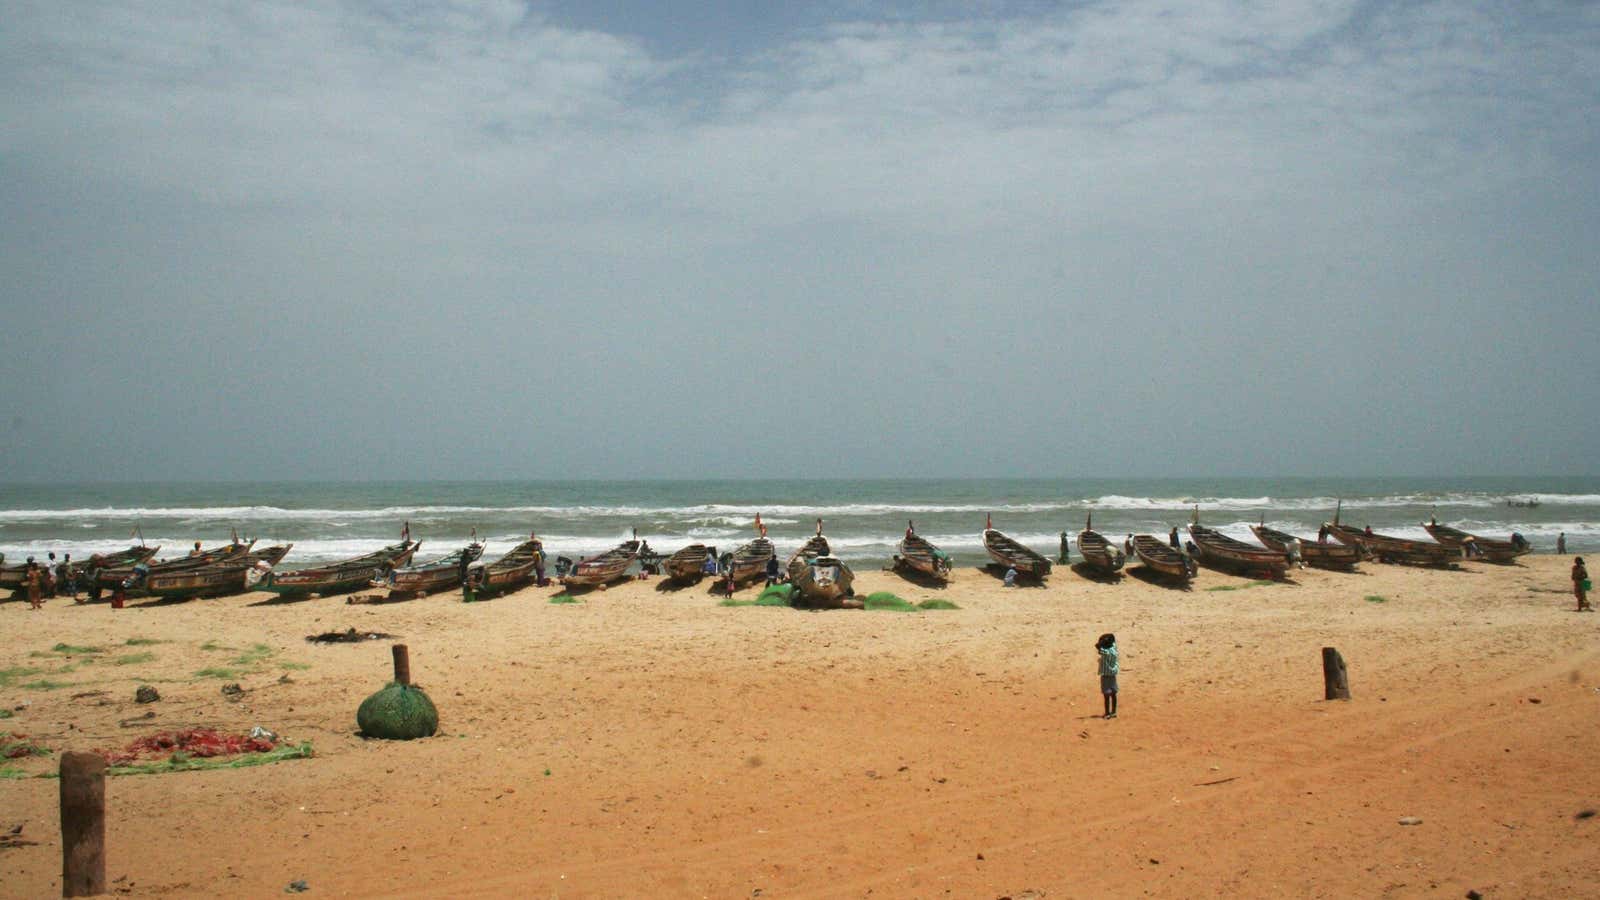 Fishing boats line the shore at the village of Lompoul, about 150 km (93 miles) north of Dakar, Senegal